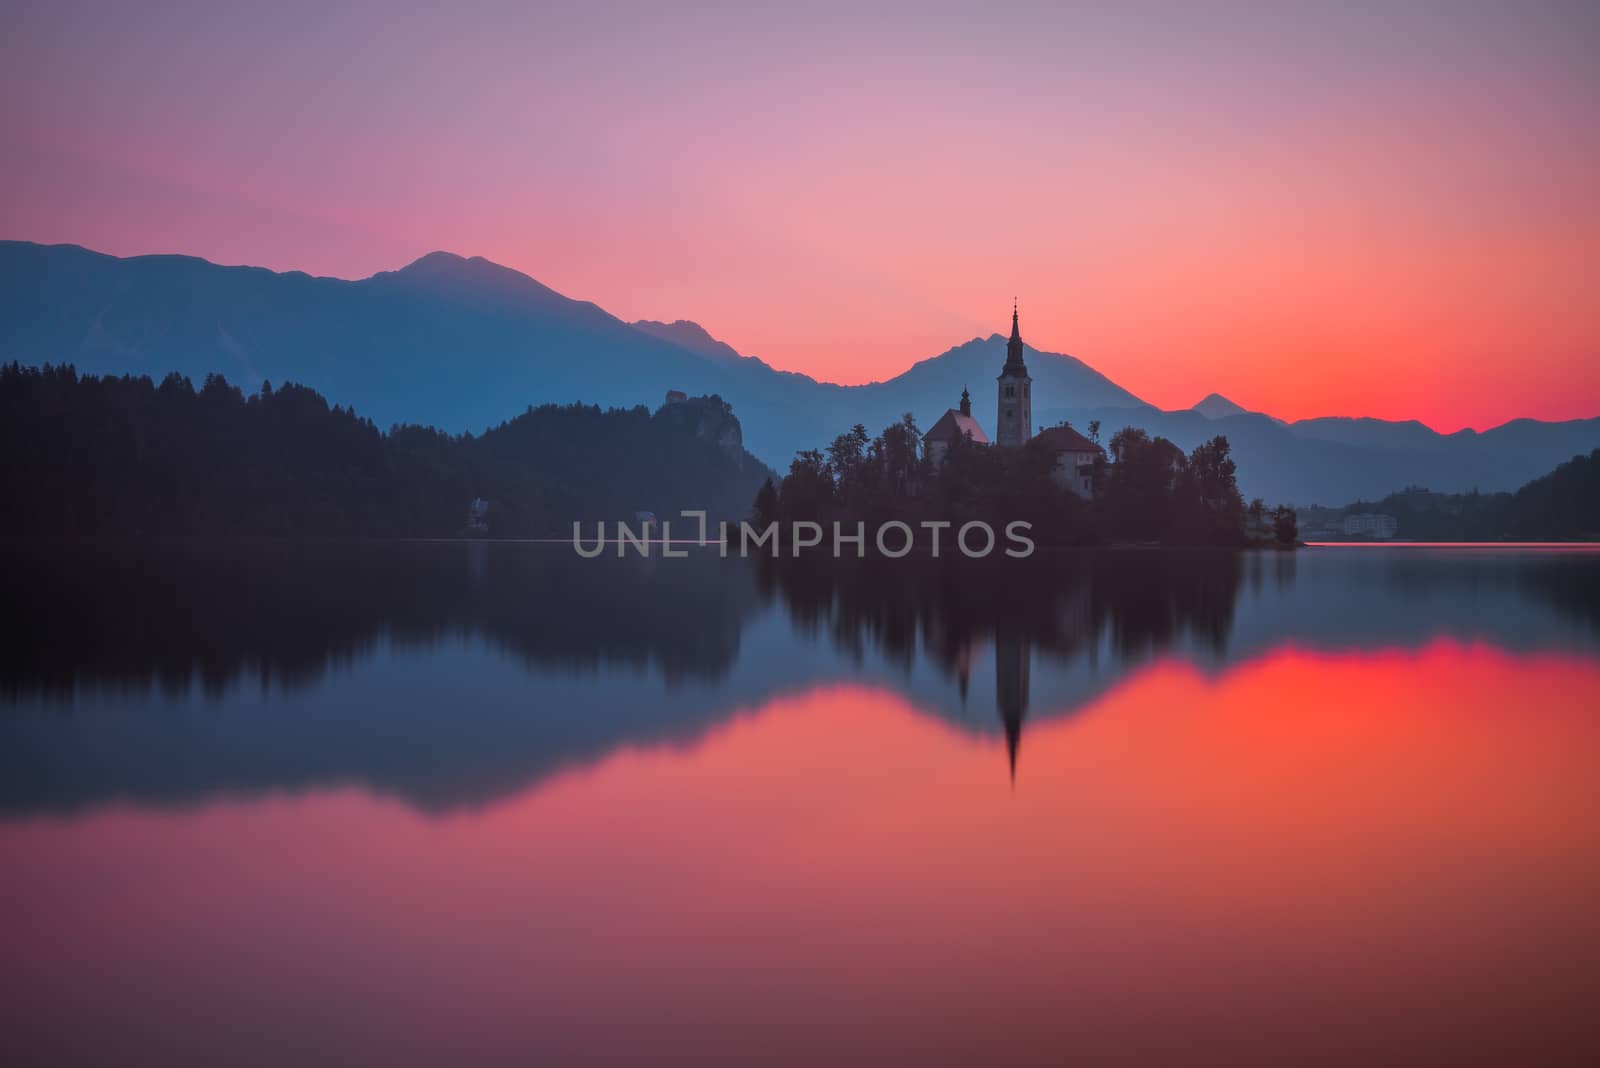 Little Island with Catholic Church in Bled Lake, Slovenia at Beautiful Red Sunrise with Castle and Mountains in Background